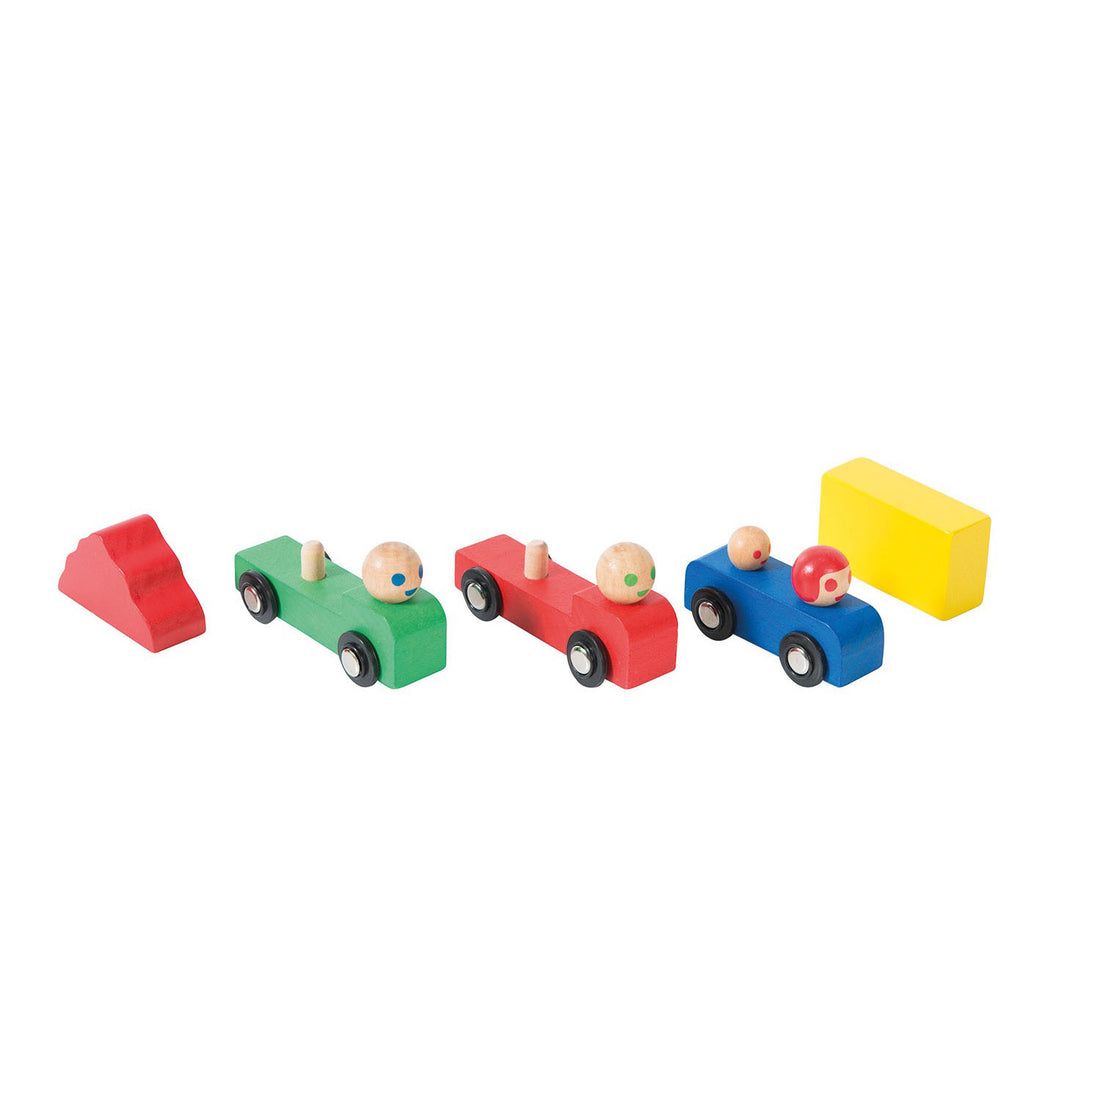 moulin-roty-wooden-cars-set-of-3- (4)